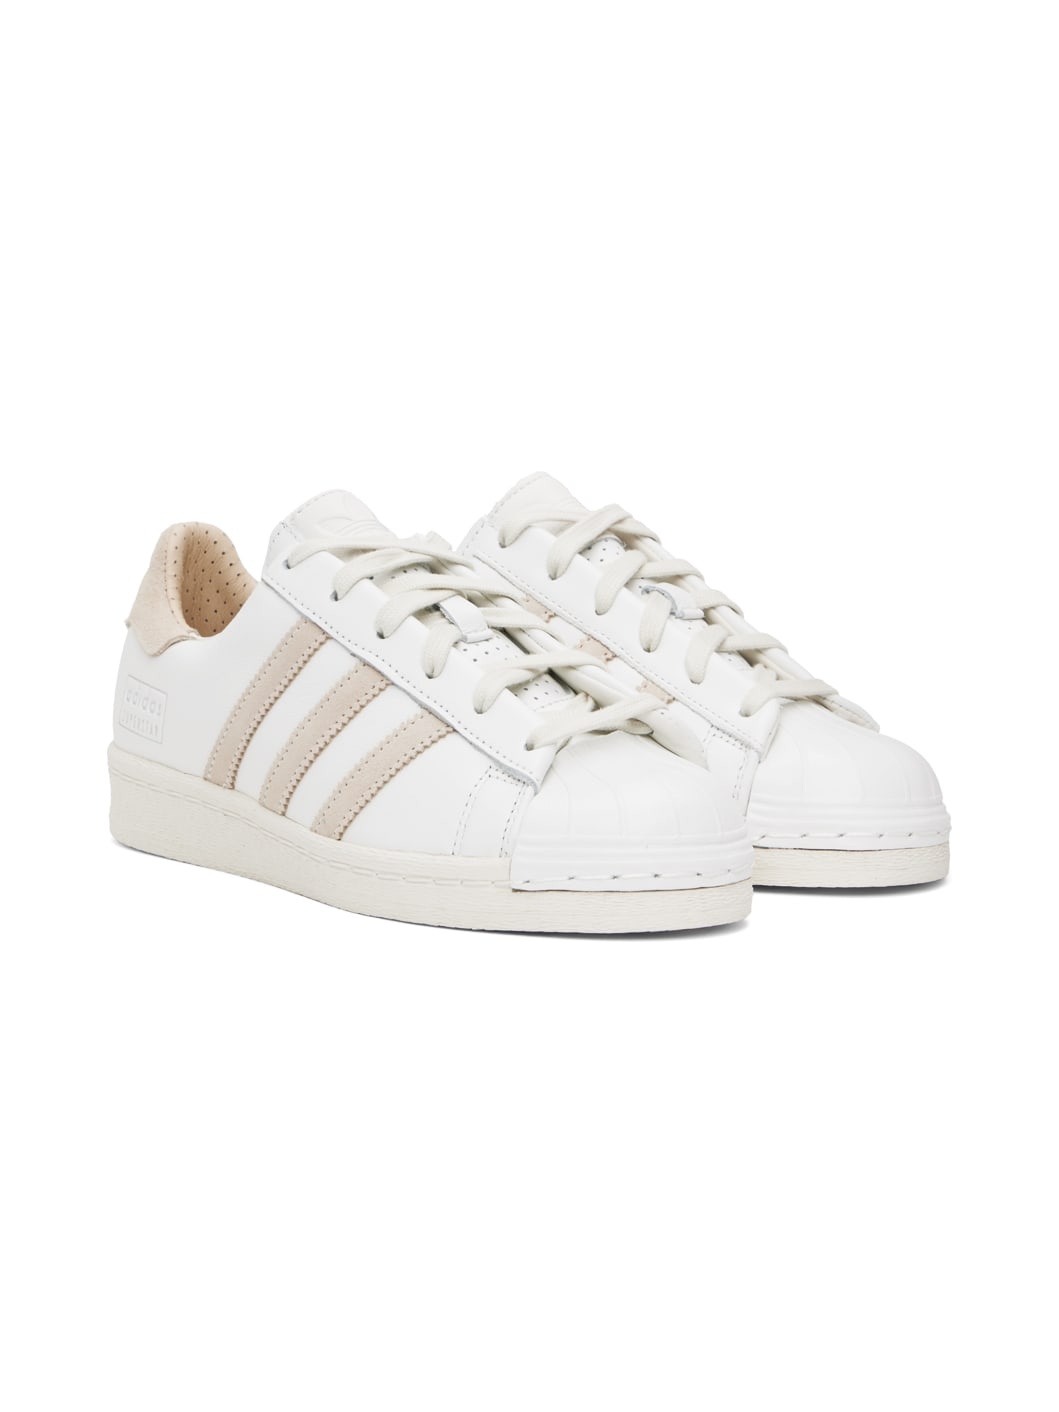 Off-White Superstar Lux Sneakers - 4